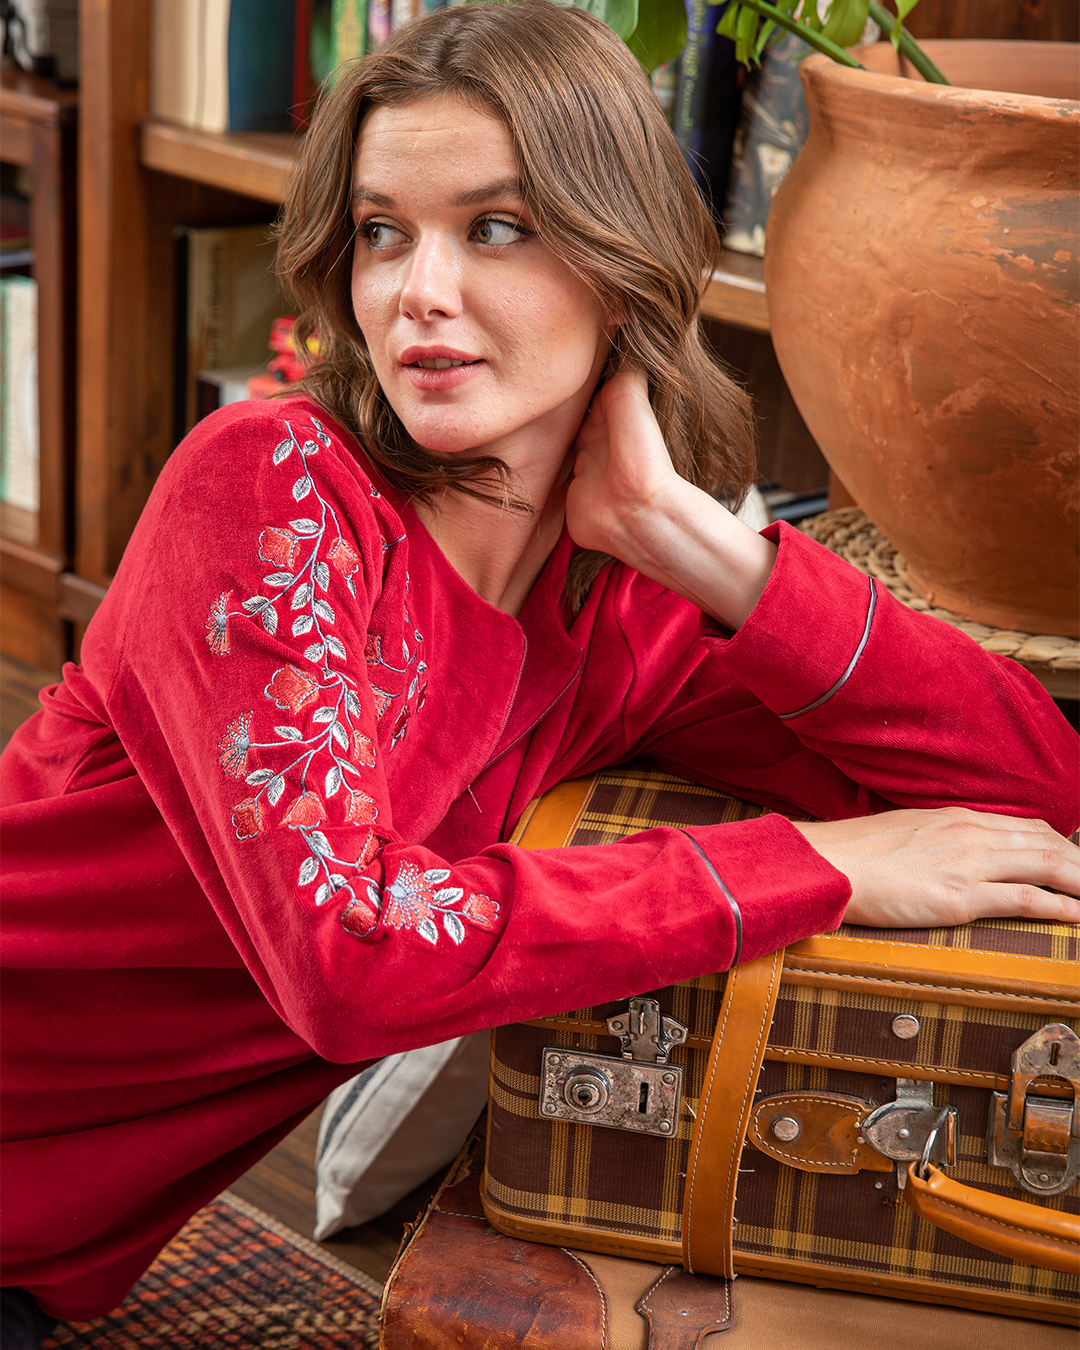 Women's pajamas, velvet, with an embroidered zipper, and flowers on the chest